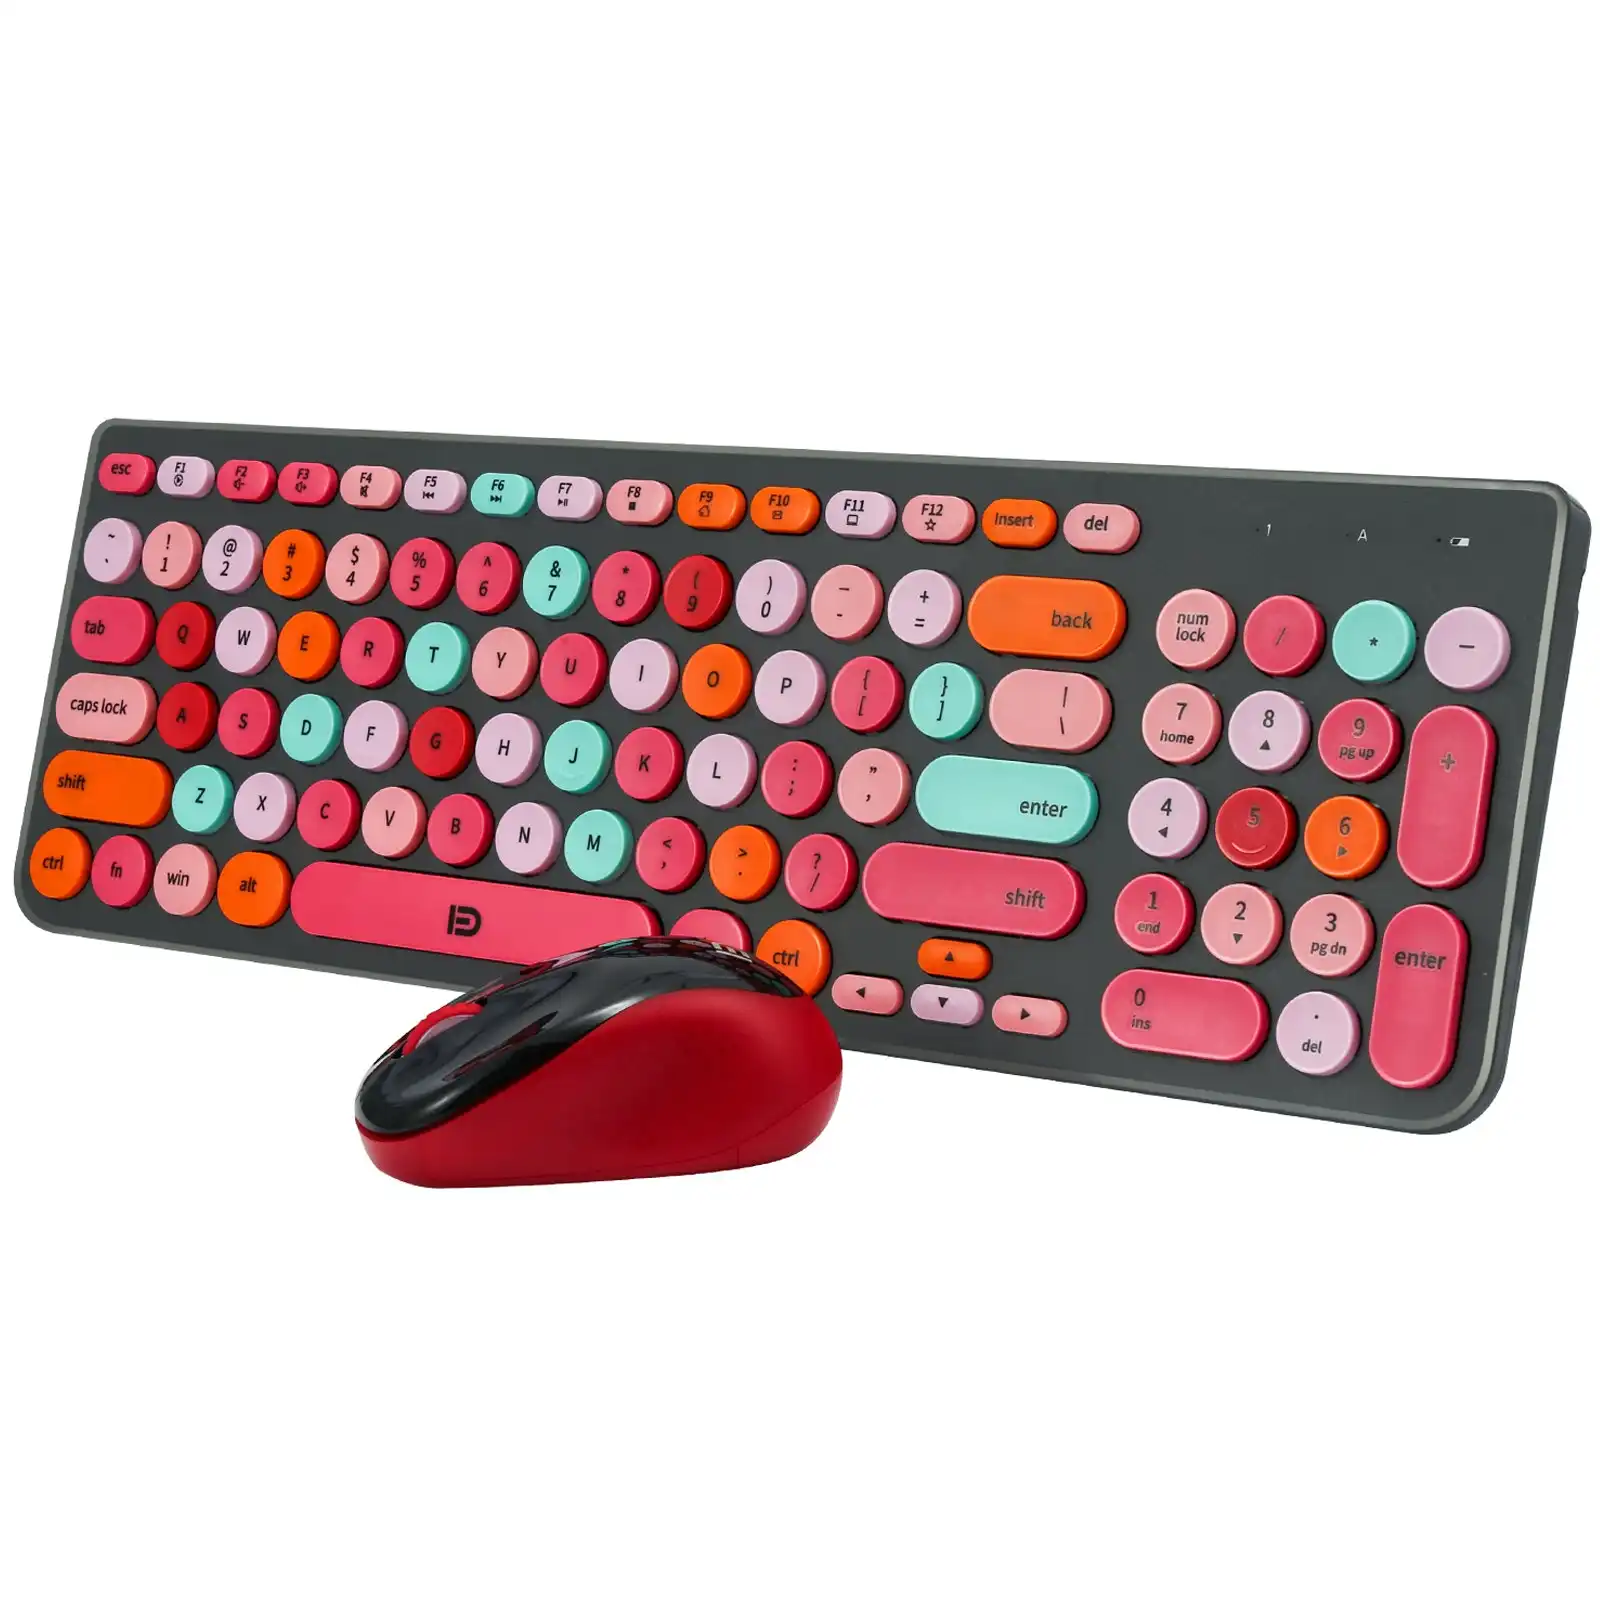 2.4Ghz Wireless Keyboard Mouse Combo Rechargeable Mac Windows Android 96 Key - Black Red